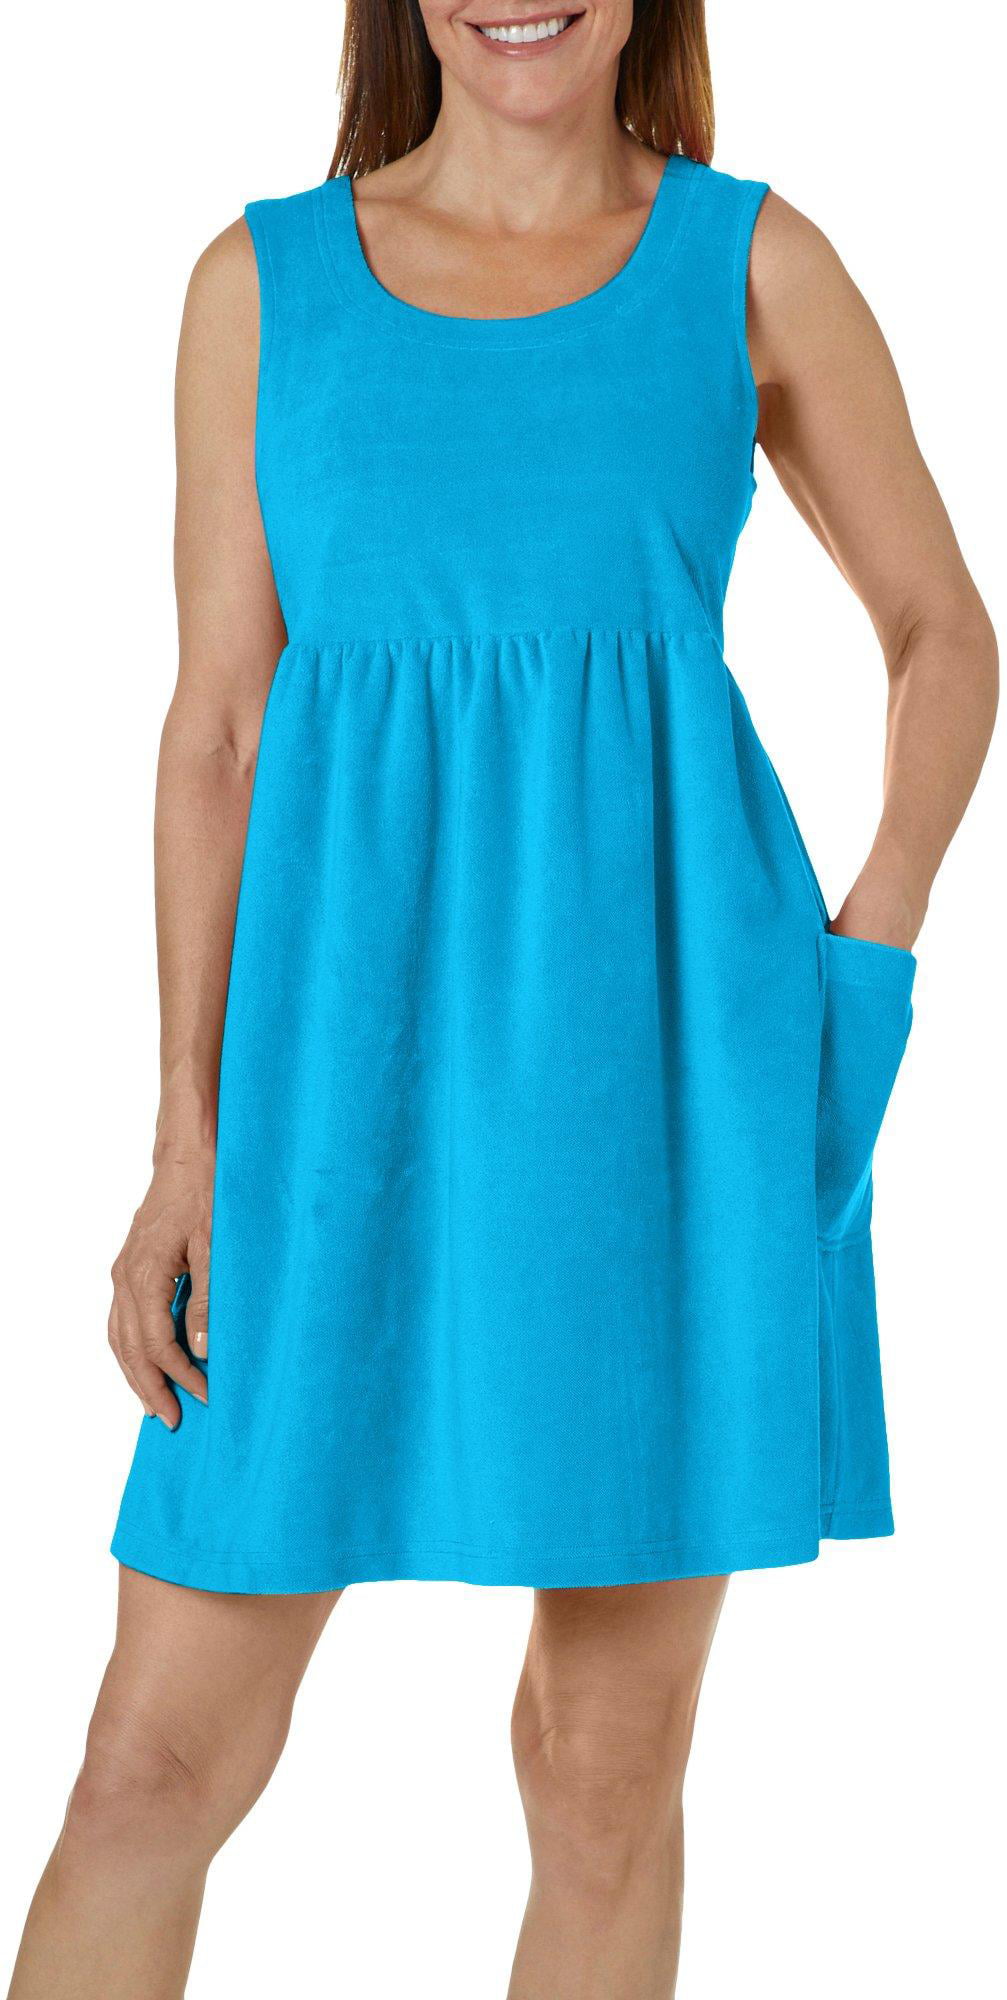 Coral Bay Womens Solid Terry Sleeveless ...